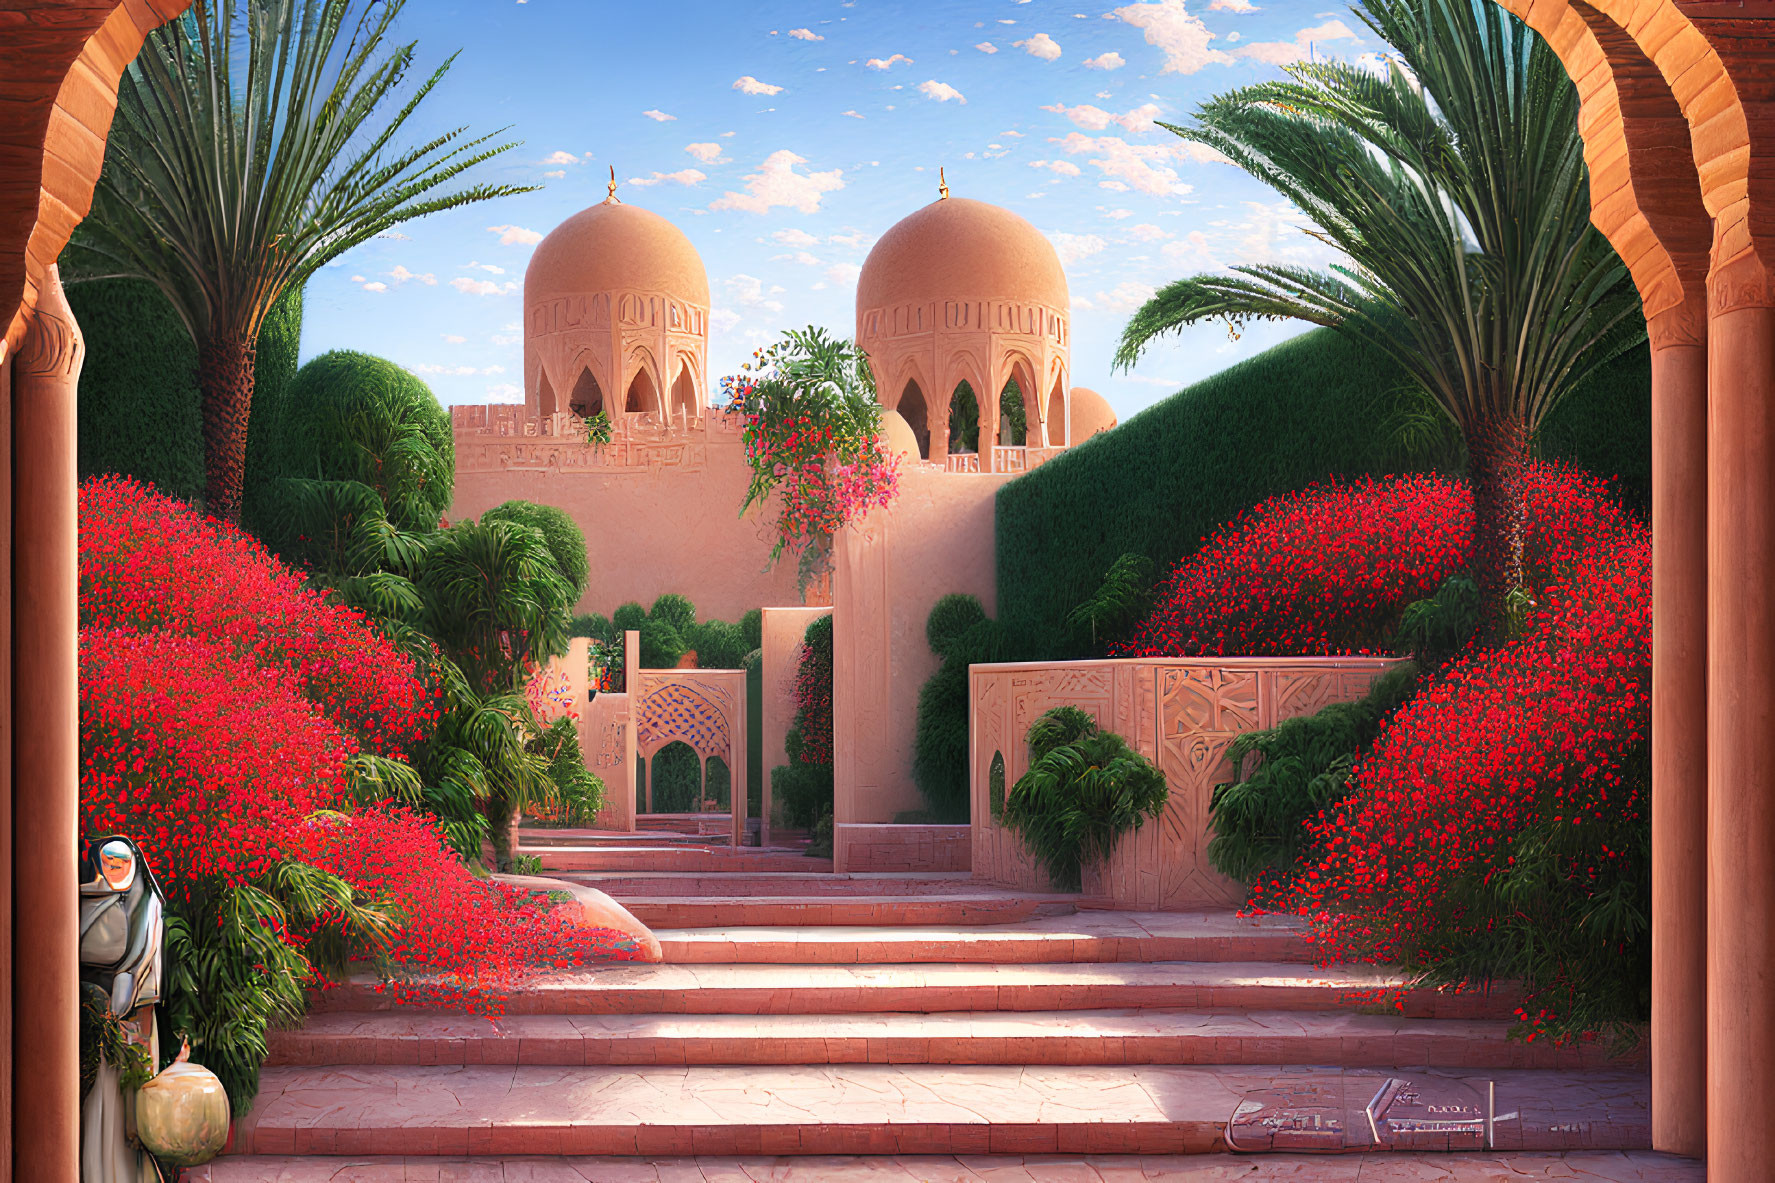 Tranquil courtyard with archways, palm trees, and red flowers